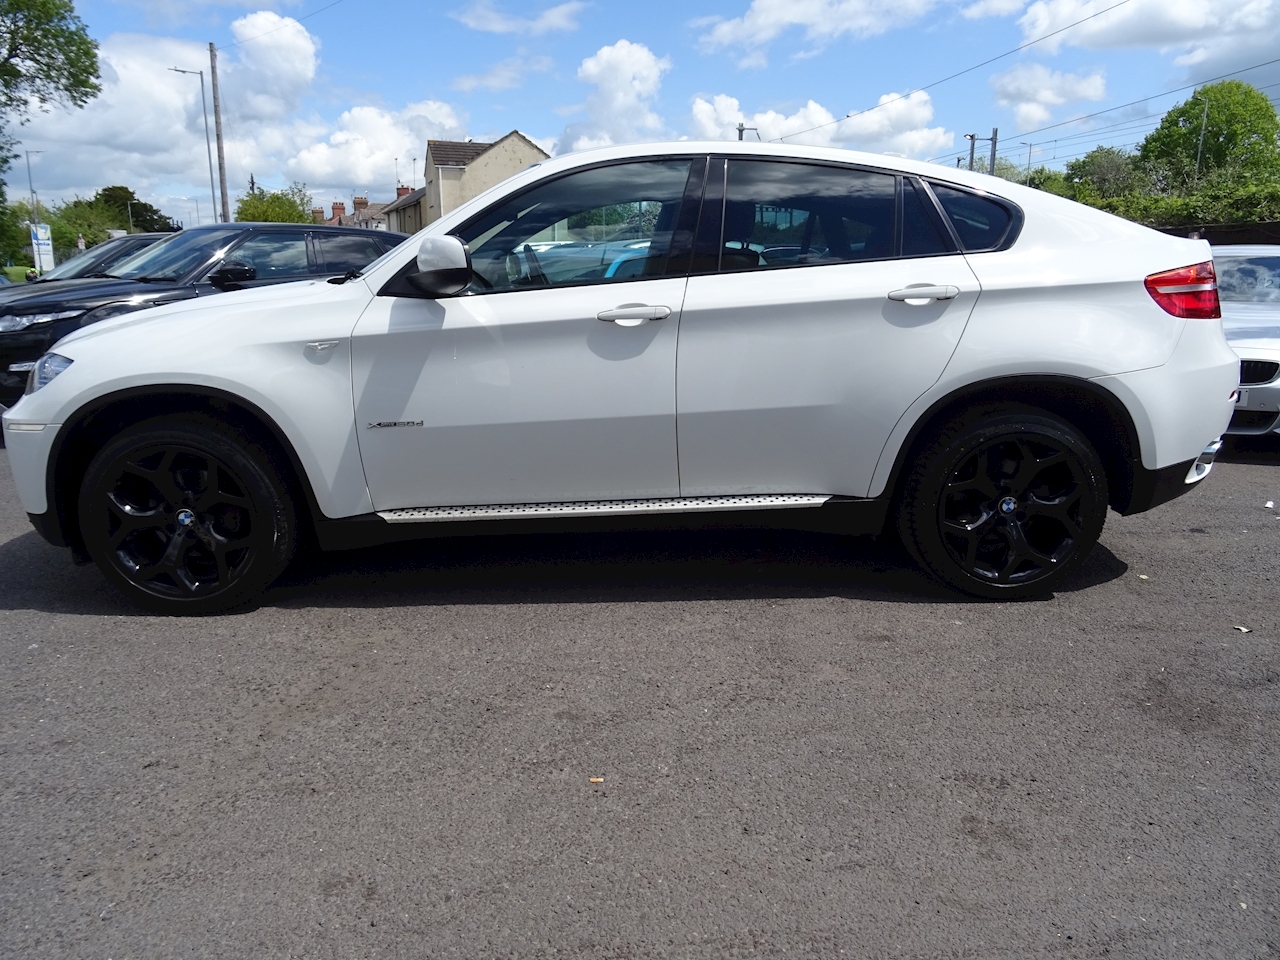 X6 Xdrive30d 3.0 5dr Coupe Automatic Diesel